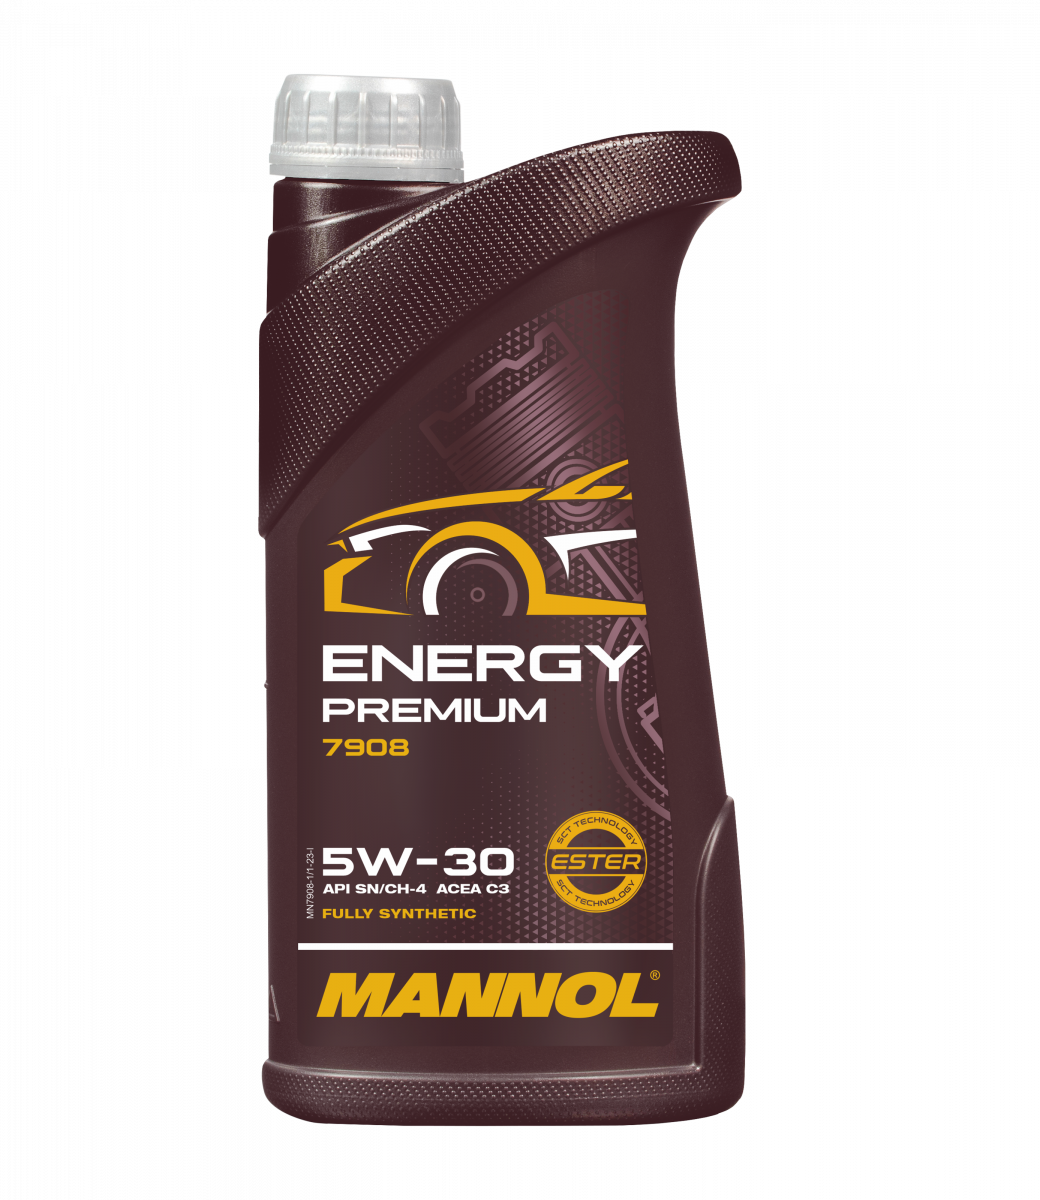  Mannol Universal premium synthetic engine oil 5W-30 specially  developed for mordern Toyota Lexus - MN7709 (4L) : Automotive